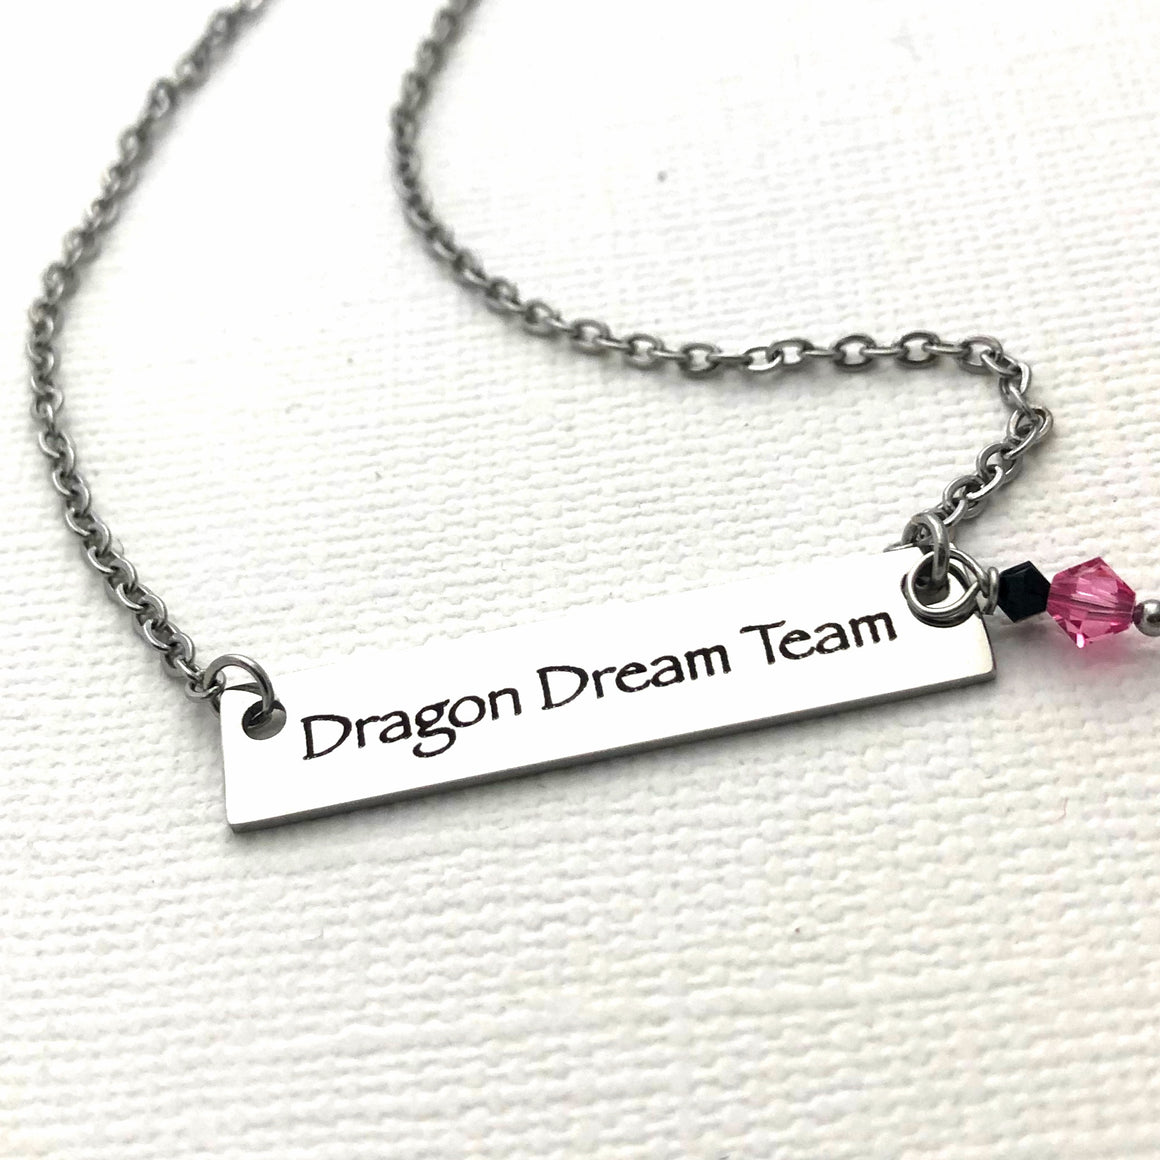 Dragon Dream Team Custom Necklace bar necklace, stainless steel necklace with crystals, Competition sport team jewelry, water sport jewelry, competition dragon boat jewelry, competition sport team jewelry, jewelry for competition, paddle boat racing, water racing sport jewelry, team name jewelry,